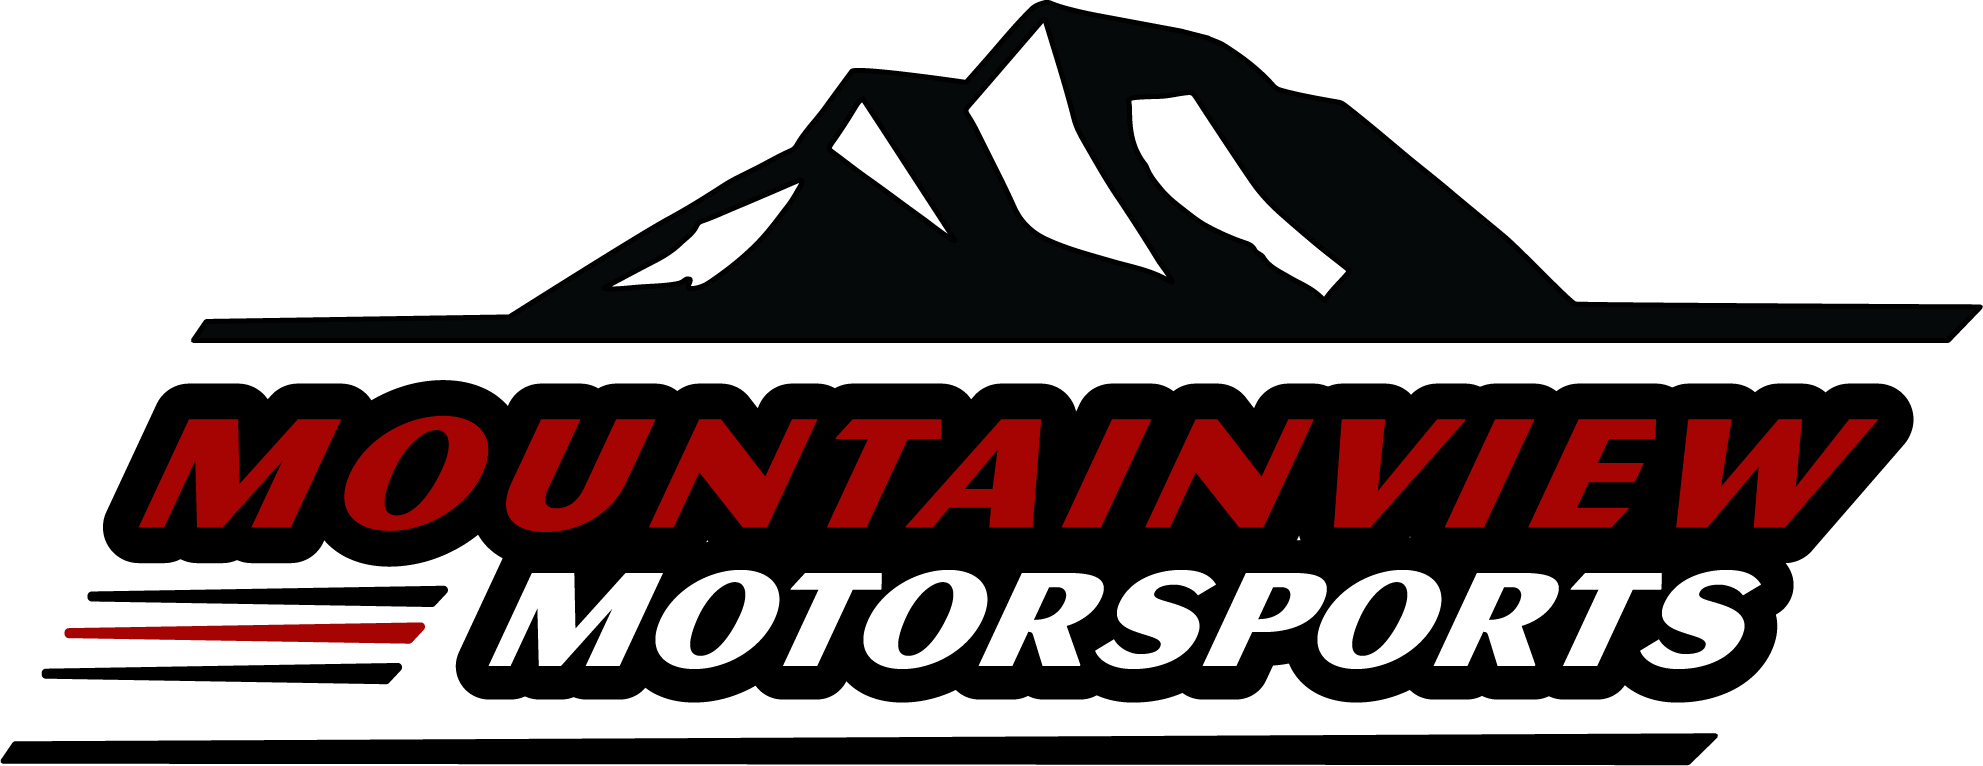 Mountainview Motorsports proudly serves Chilliwack, BC and our neighbors in Hope, Abbotsford, Langley, Lynden and Maple Ridge